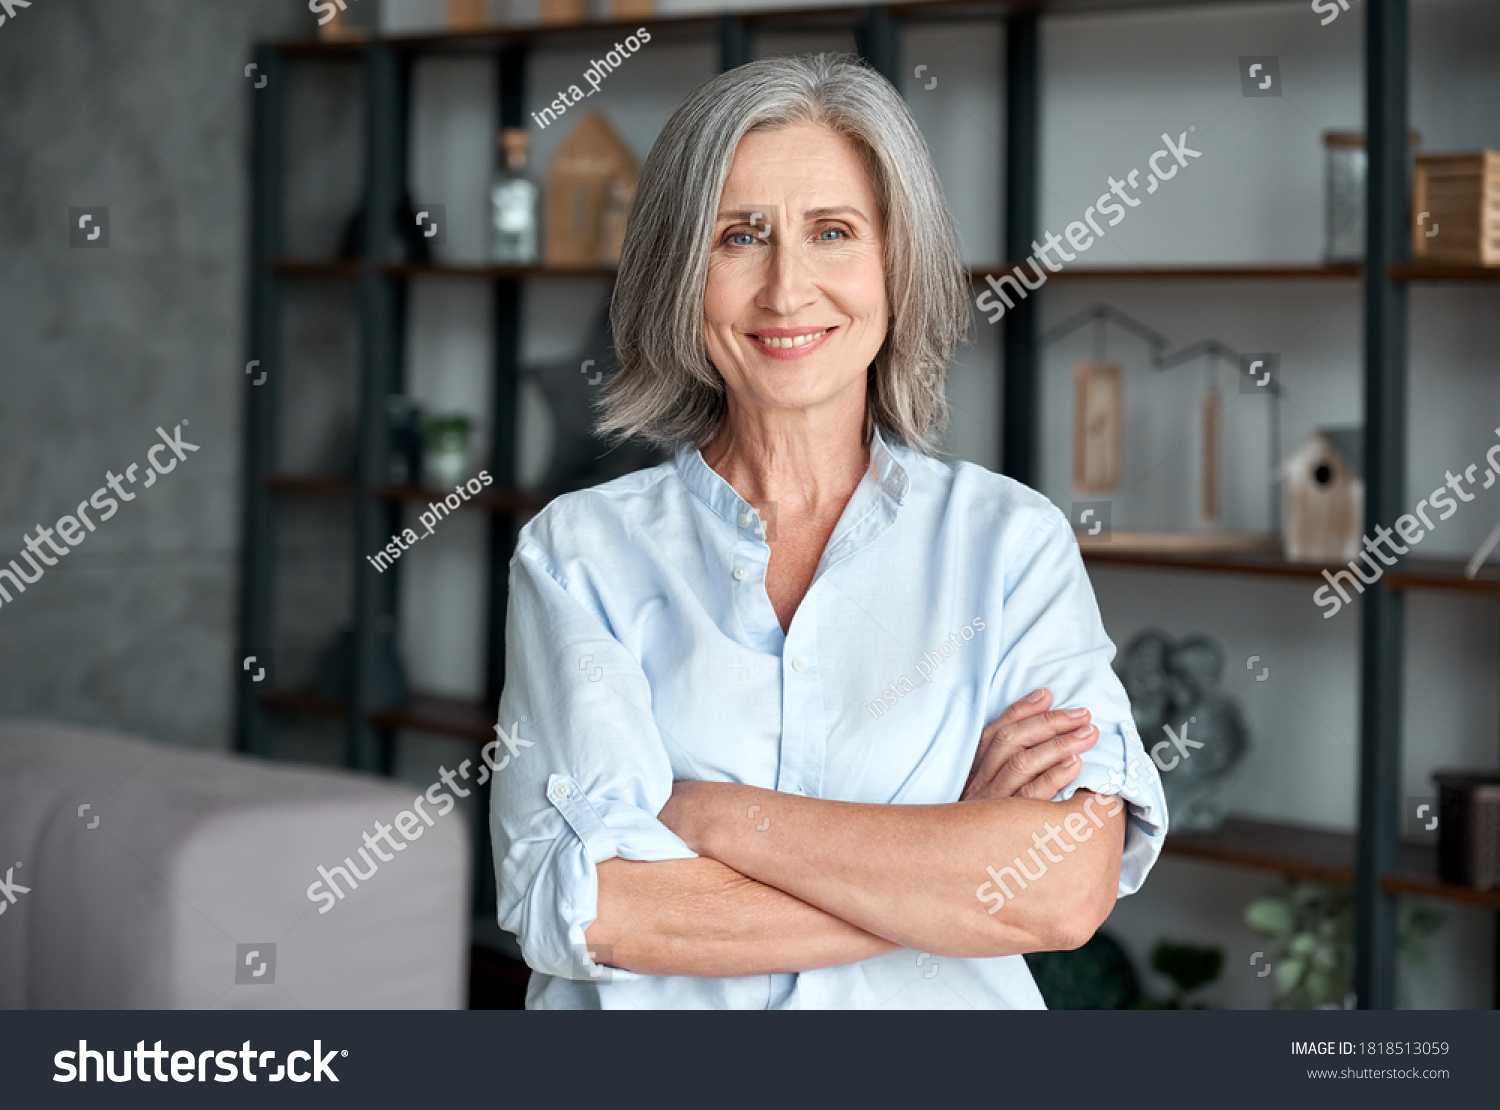 Smiling confident stylish mature middle aged woman standing at home office. Old senior businesswoman, 60s gray-haired lady executive business leader manager looking at camera arms crossed, portrait. #1818513059